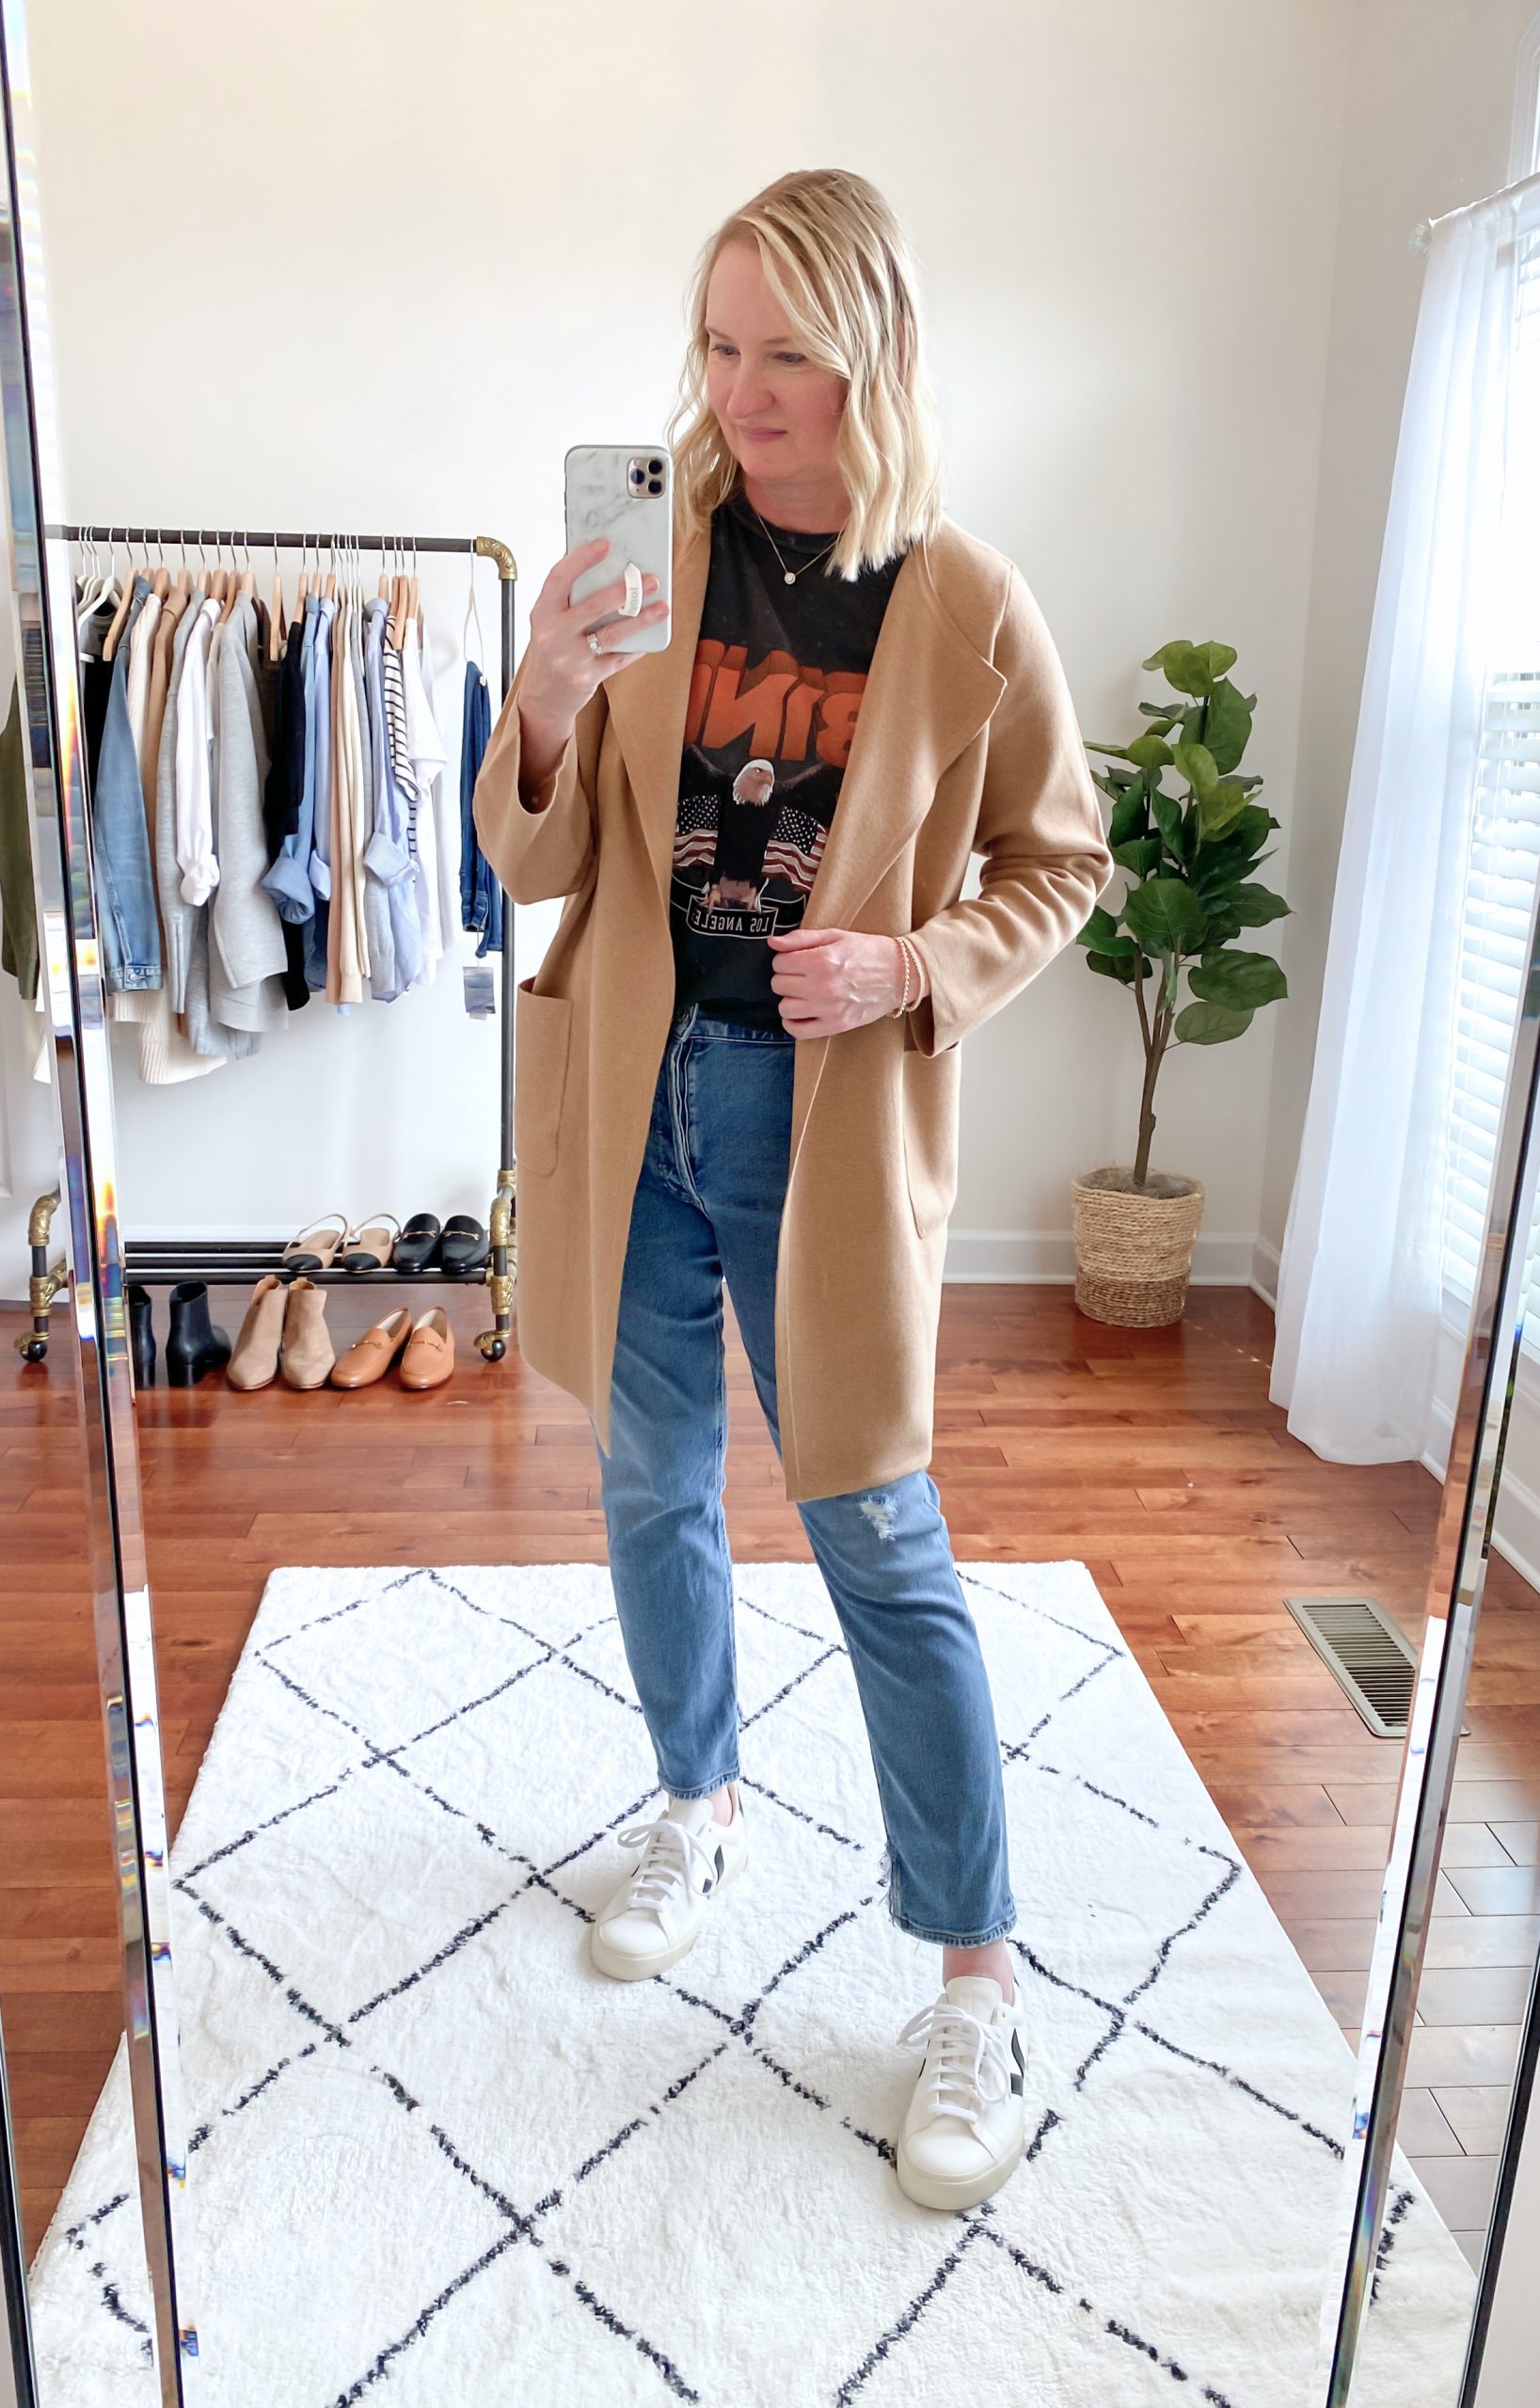 Fall Outfit Essentials From Nordstrom Rack  Fall clothing essentials, Nordstrom  rack outfits, Clothing essentials